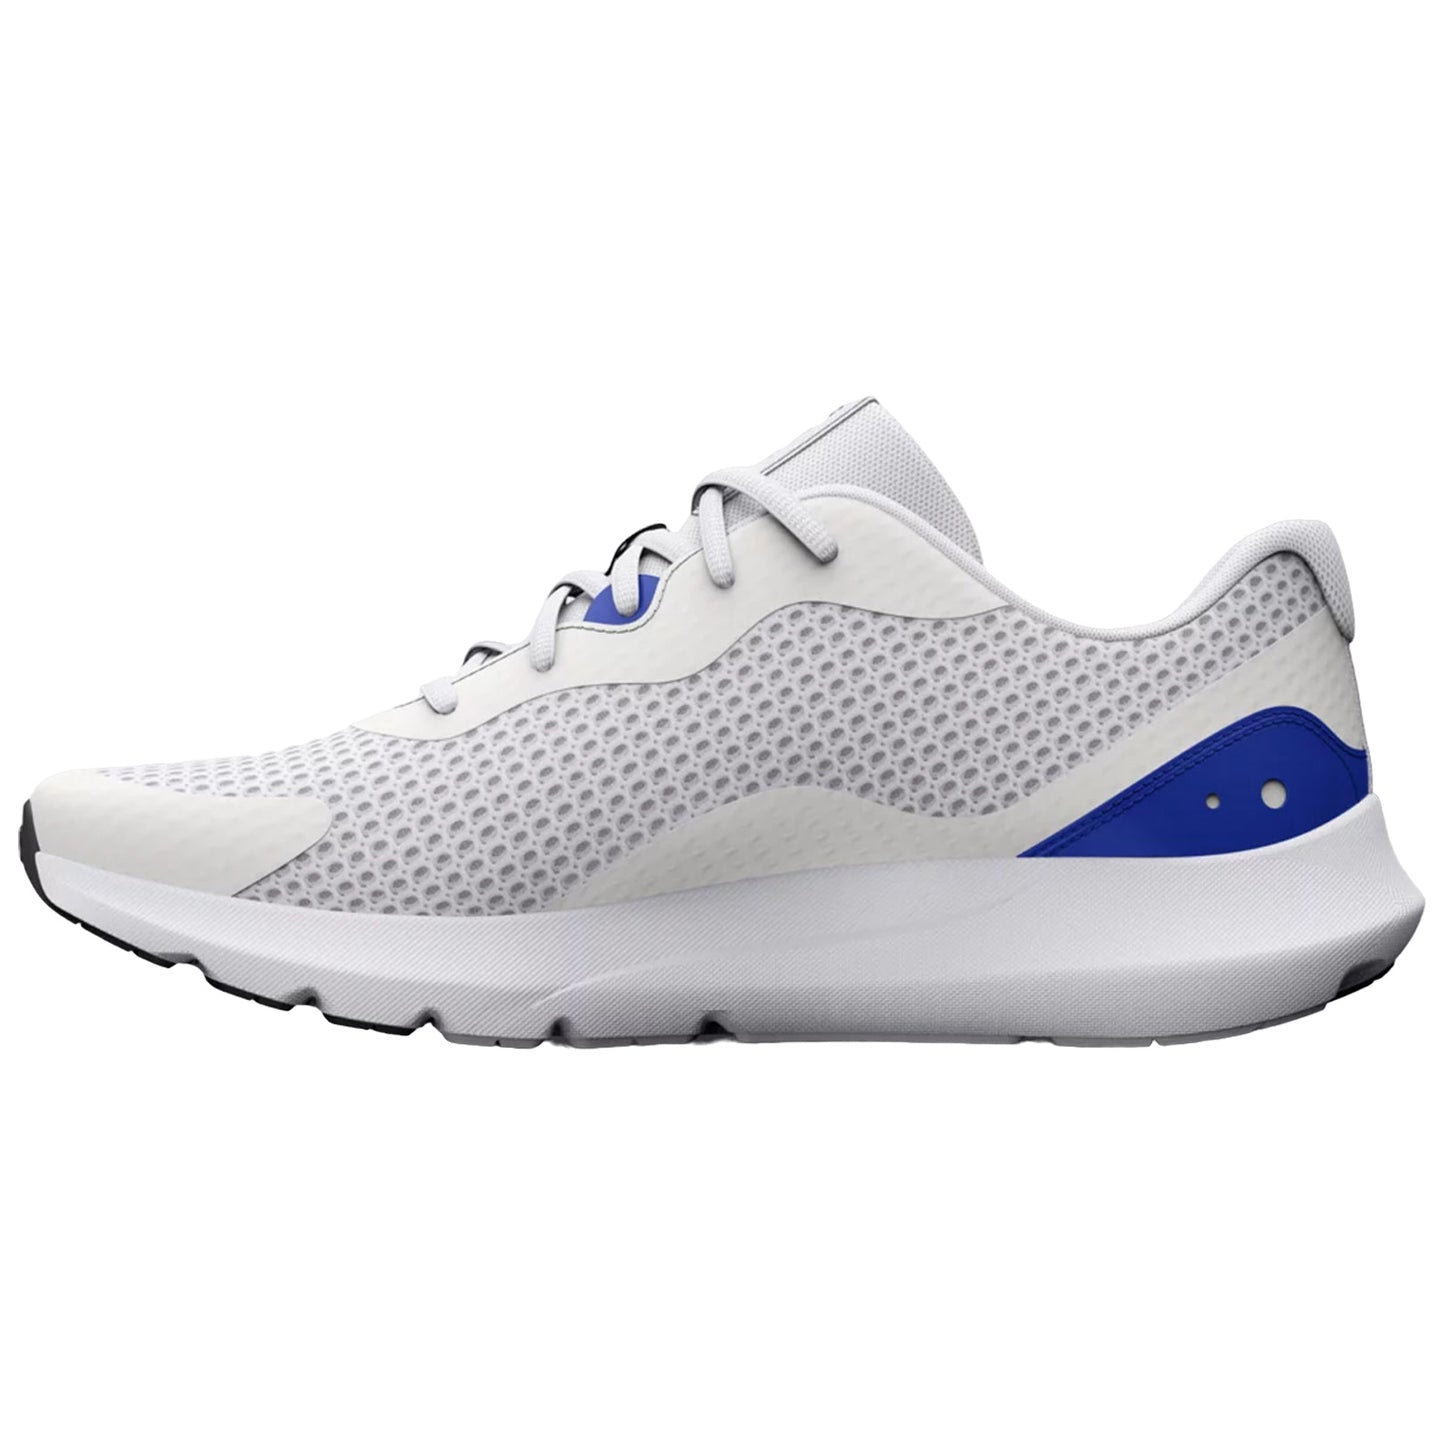 Under Armour Mens Surge 3 Trainers - 7.5 UK